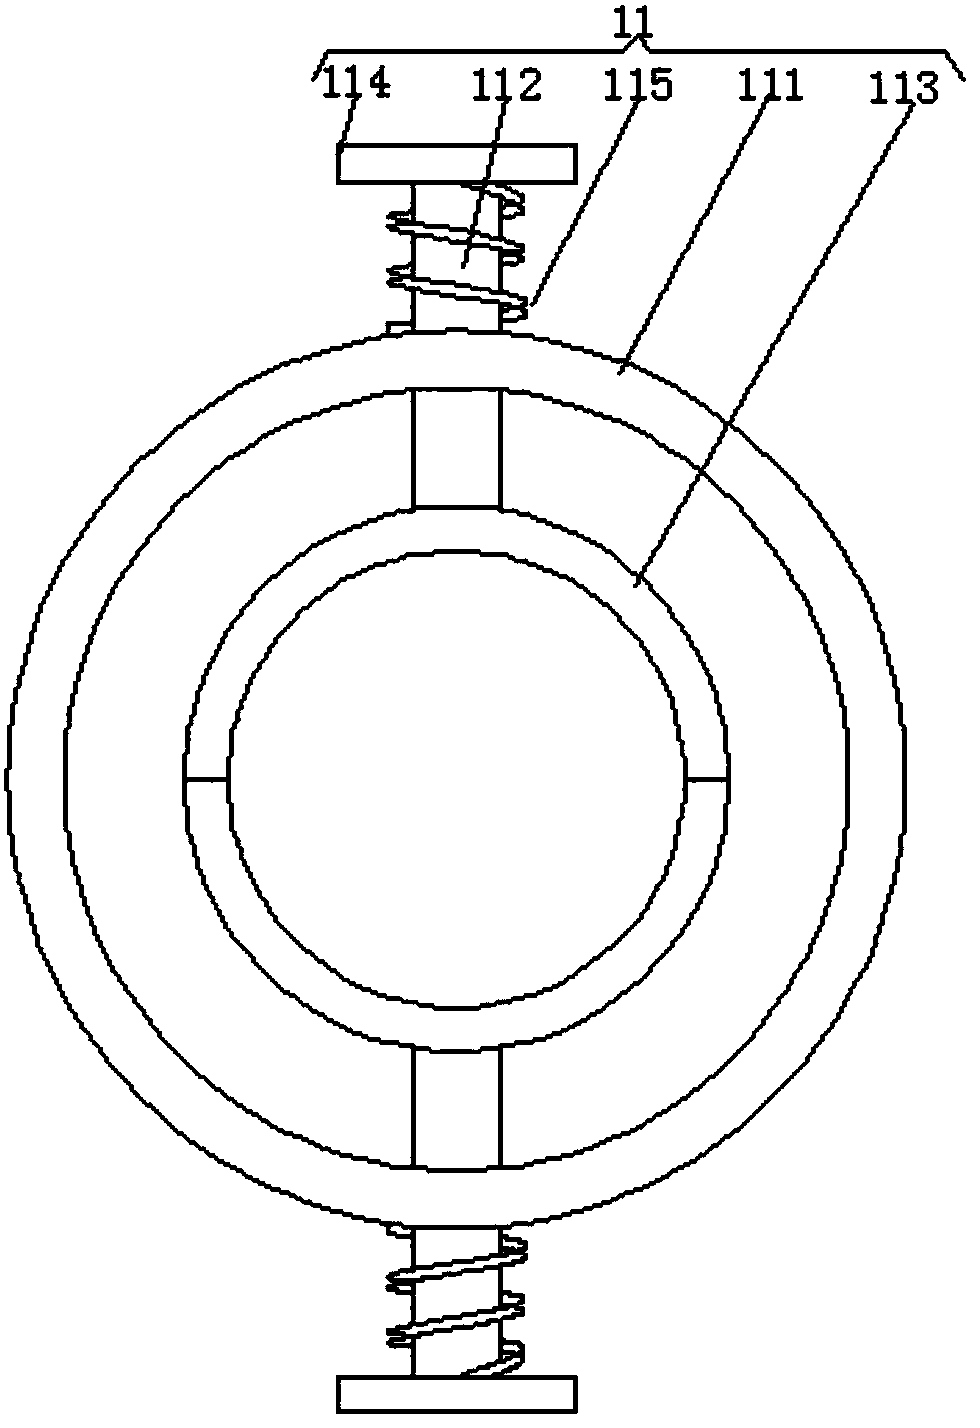 An induction coil with adjustable coil size